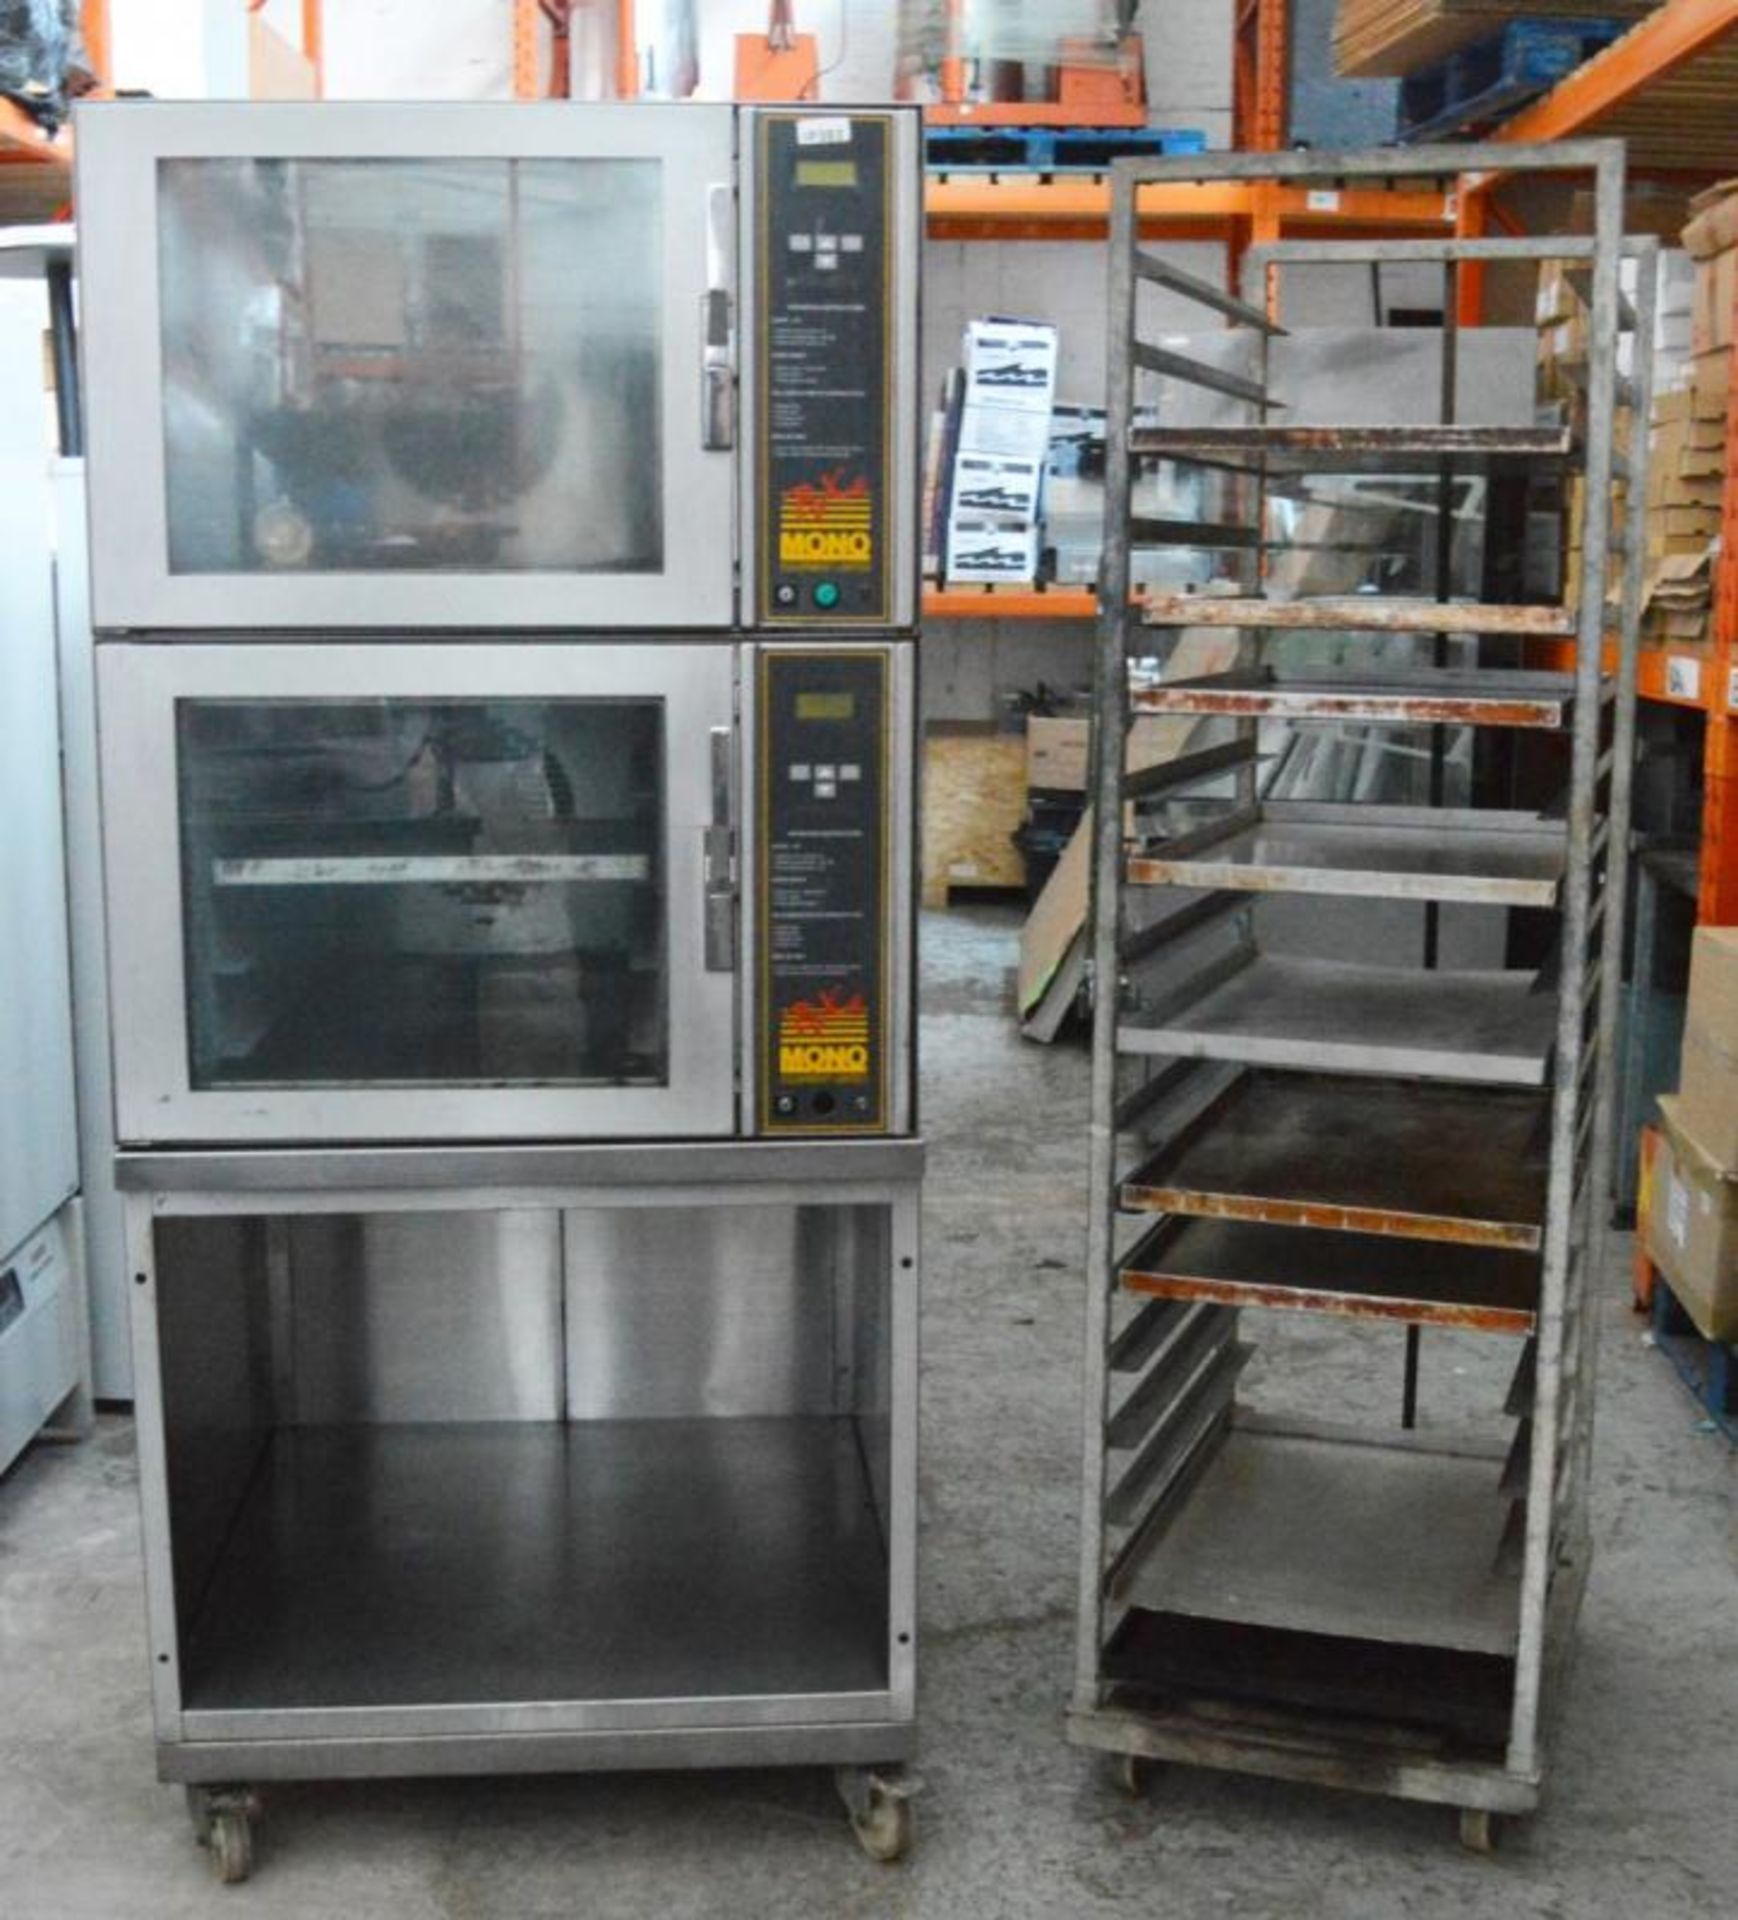 1 x Mono FG159 Double Bake Off Steam Convection Oven - Includes Ten Cooking Trays, Mobile Tray Holde